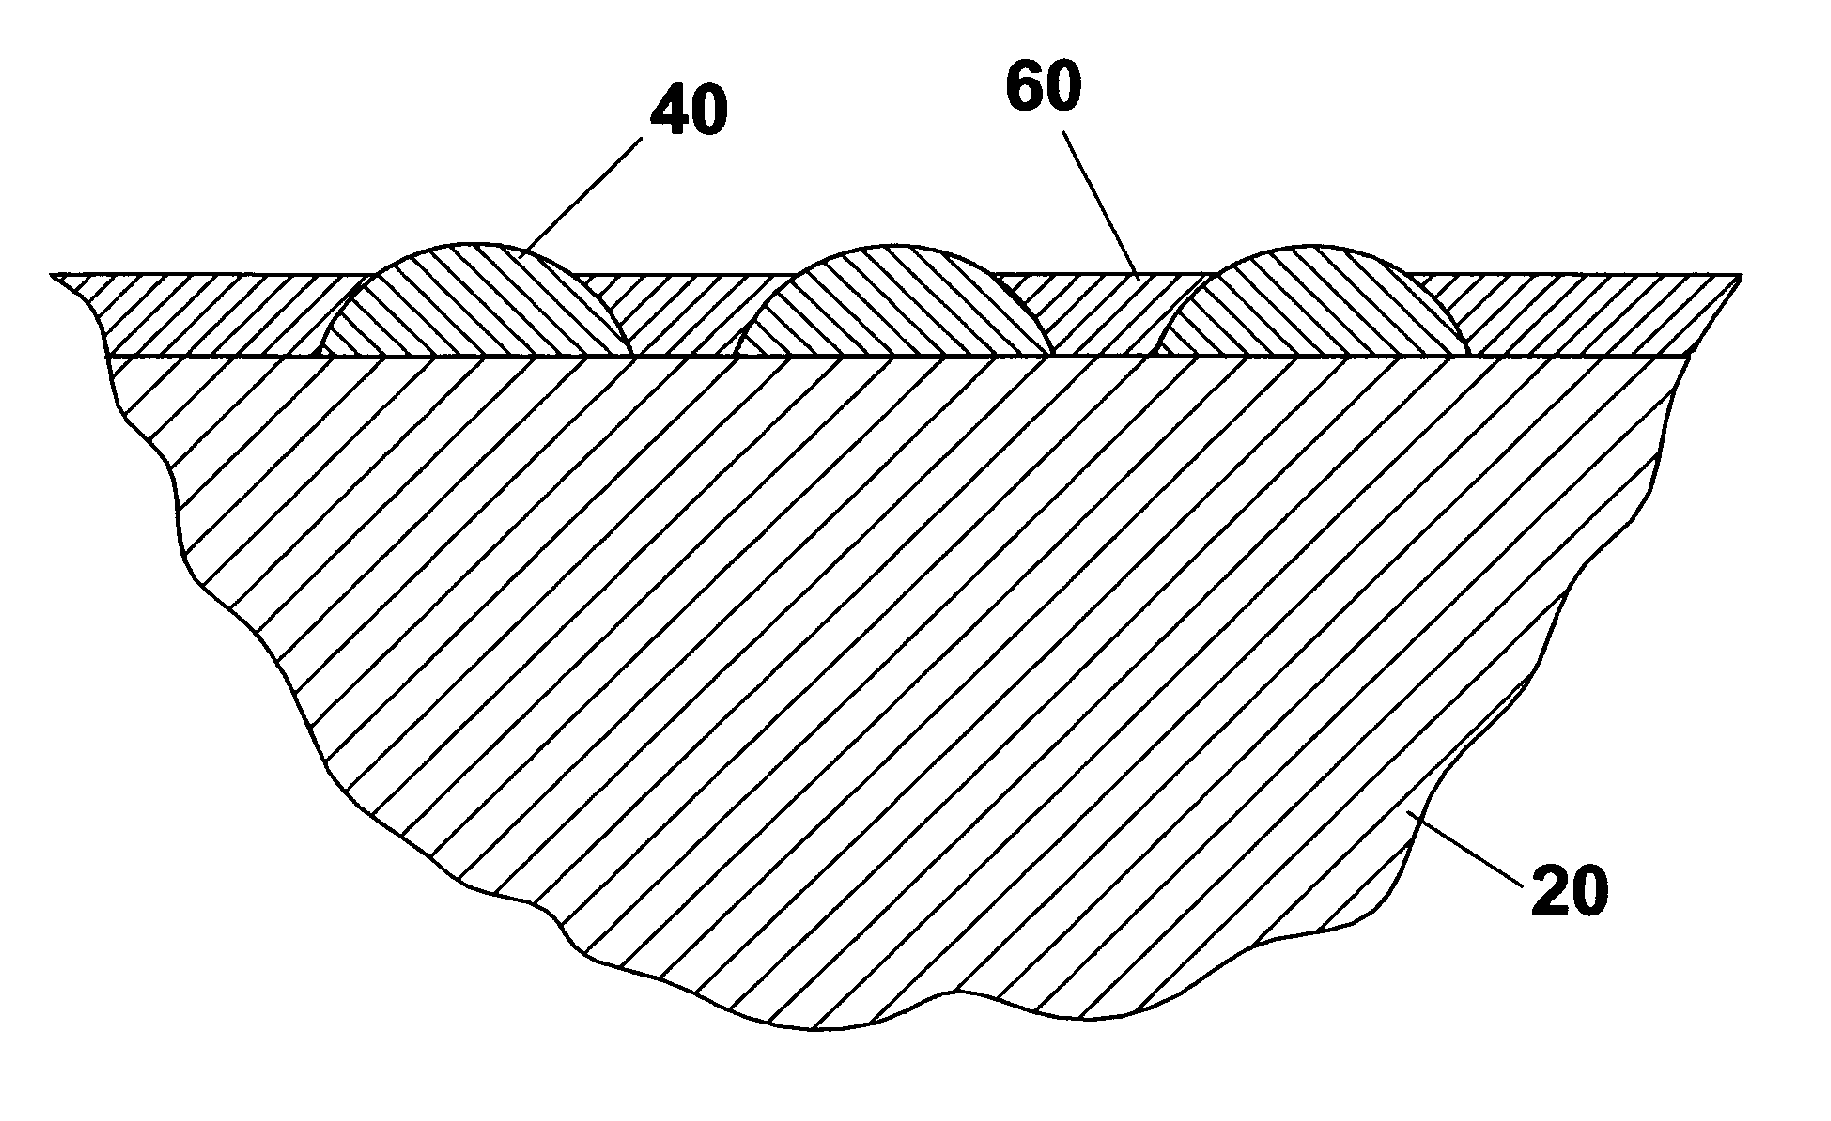 Continuous or discrete metallization layer on a ceramic substrate